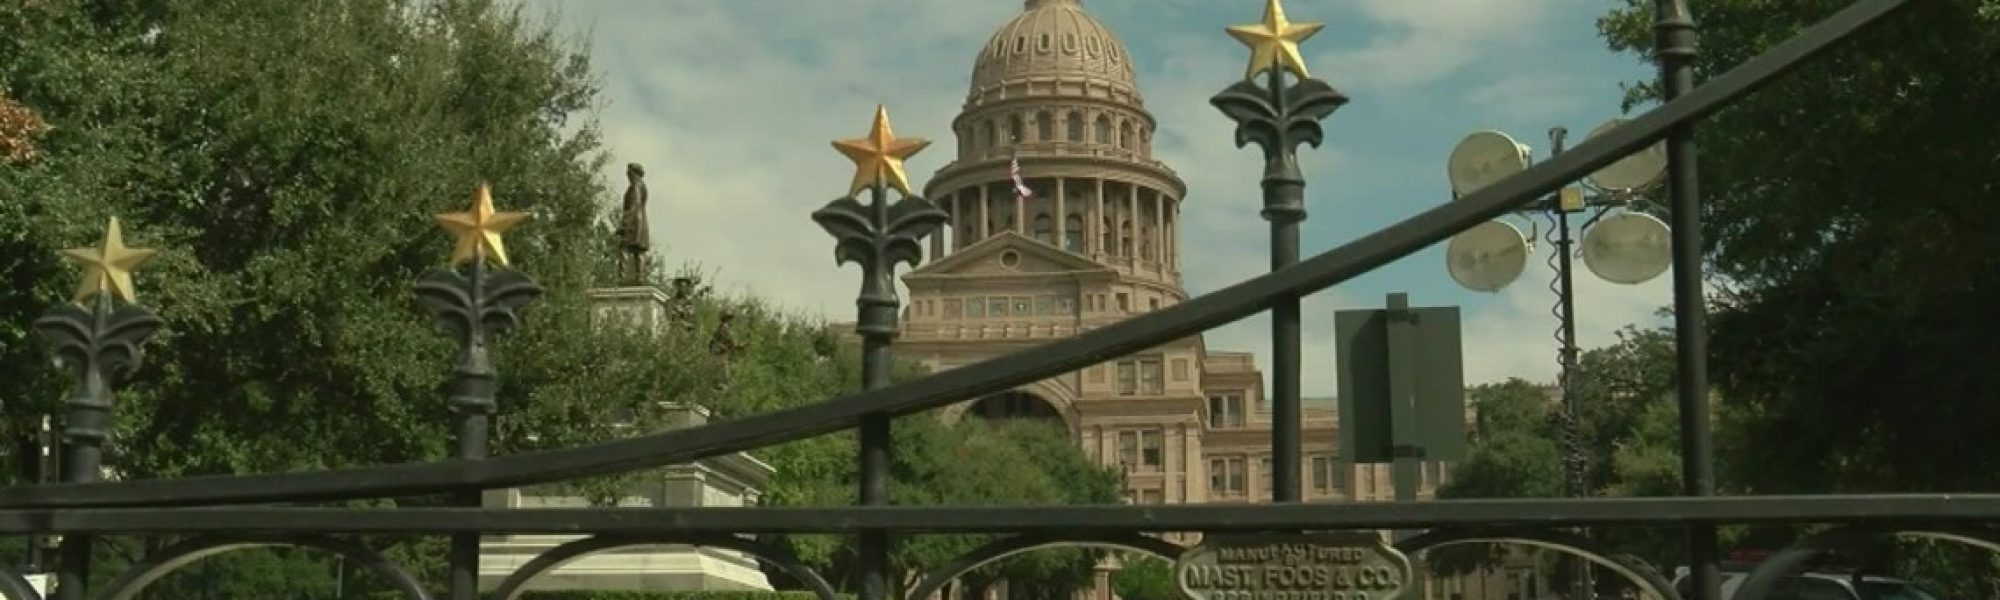 Texas Legislature to begin with several key issues facing lawmakers